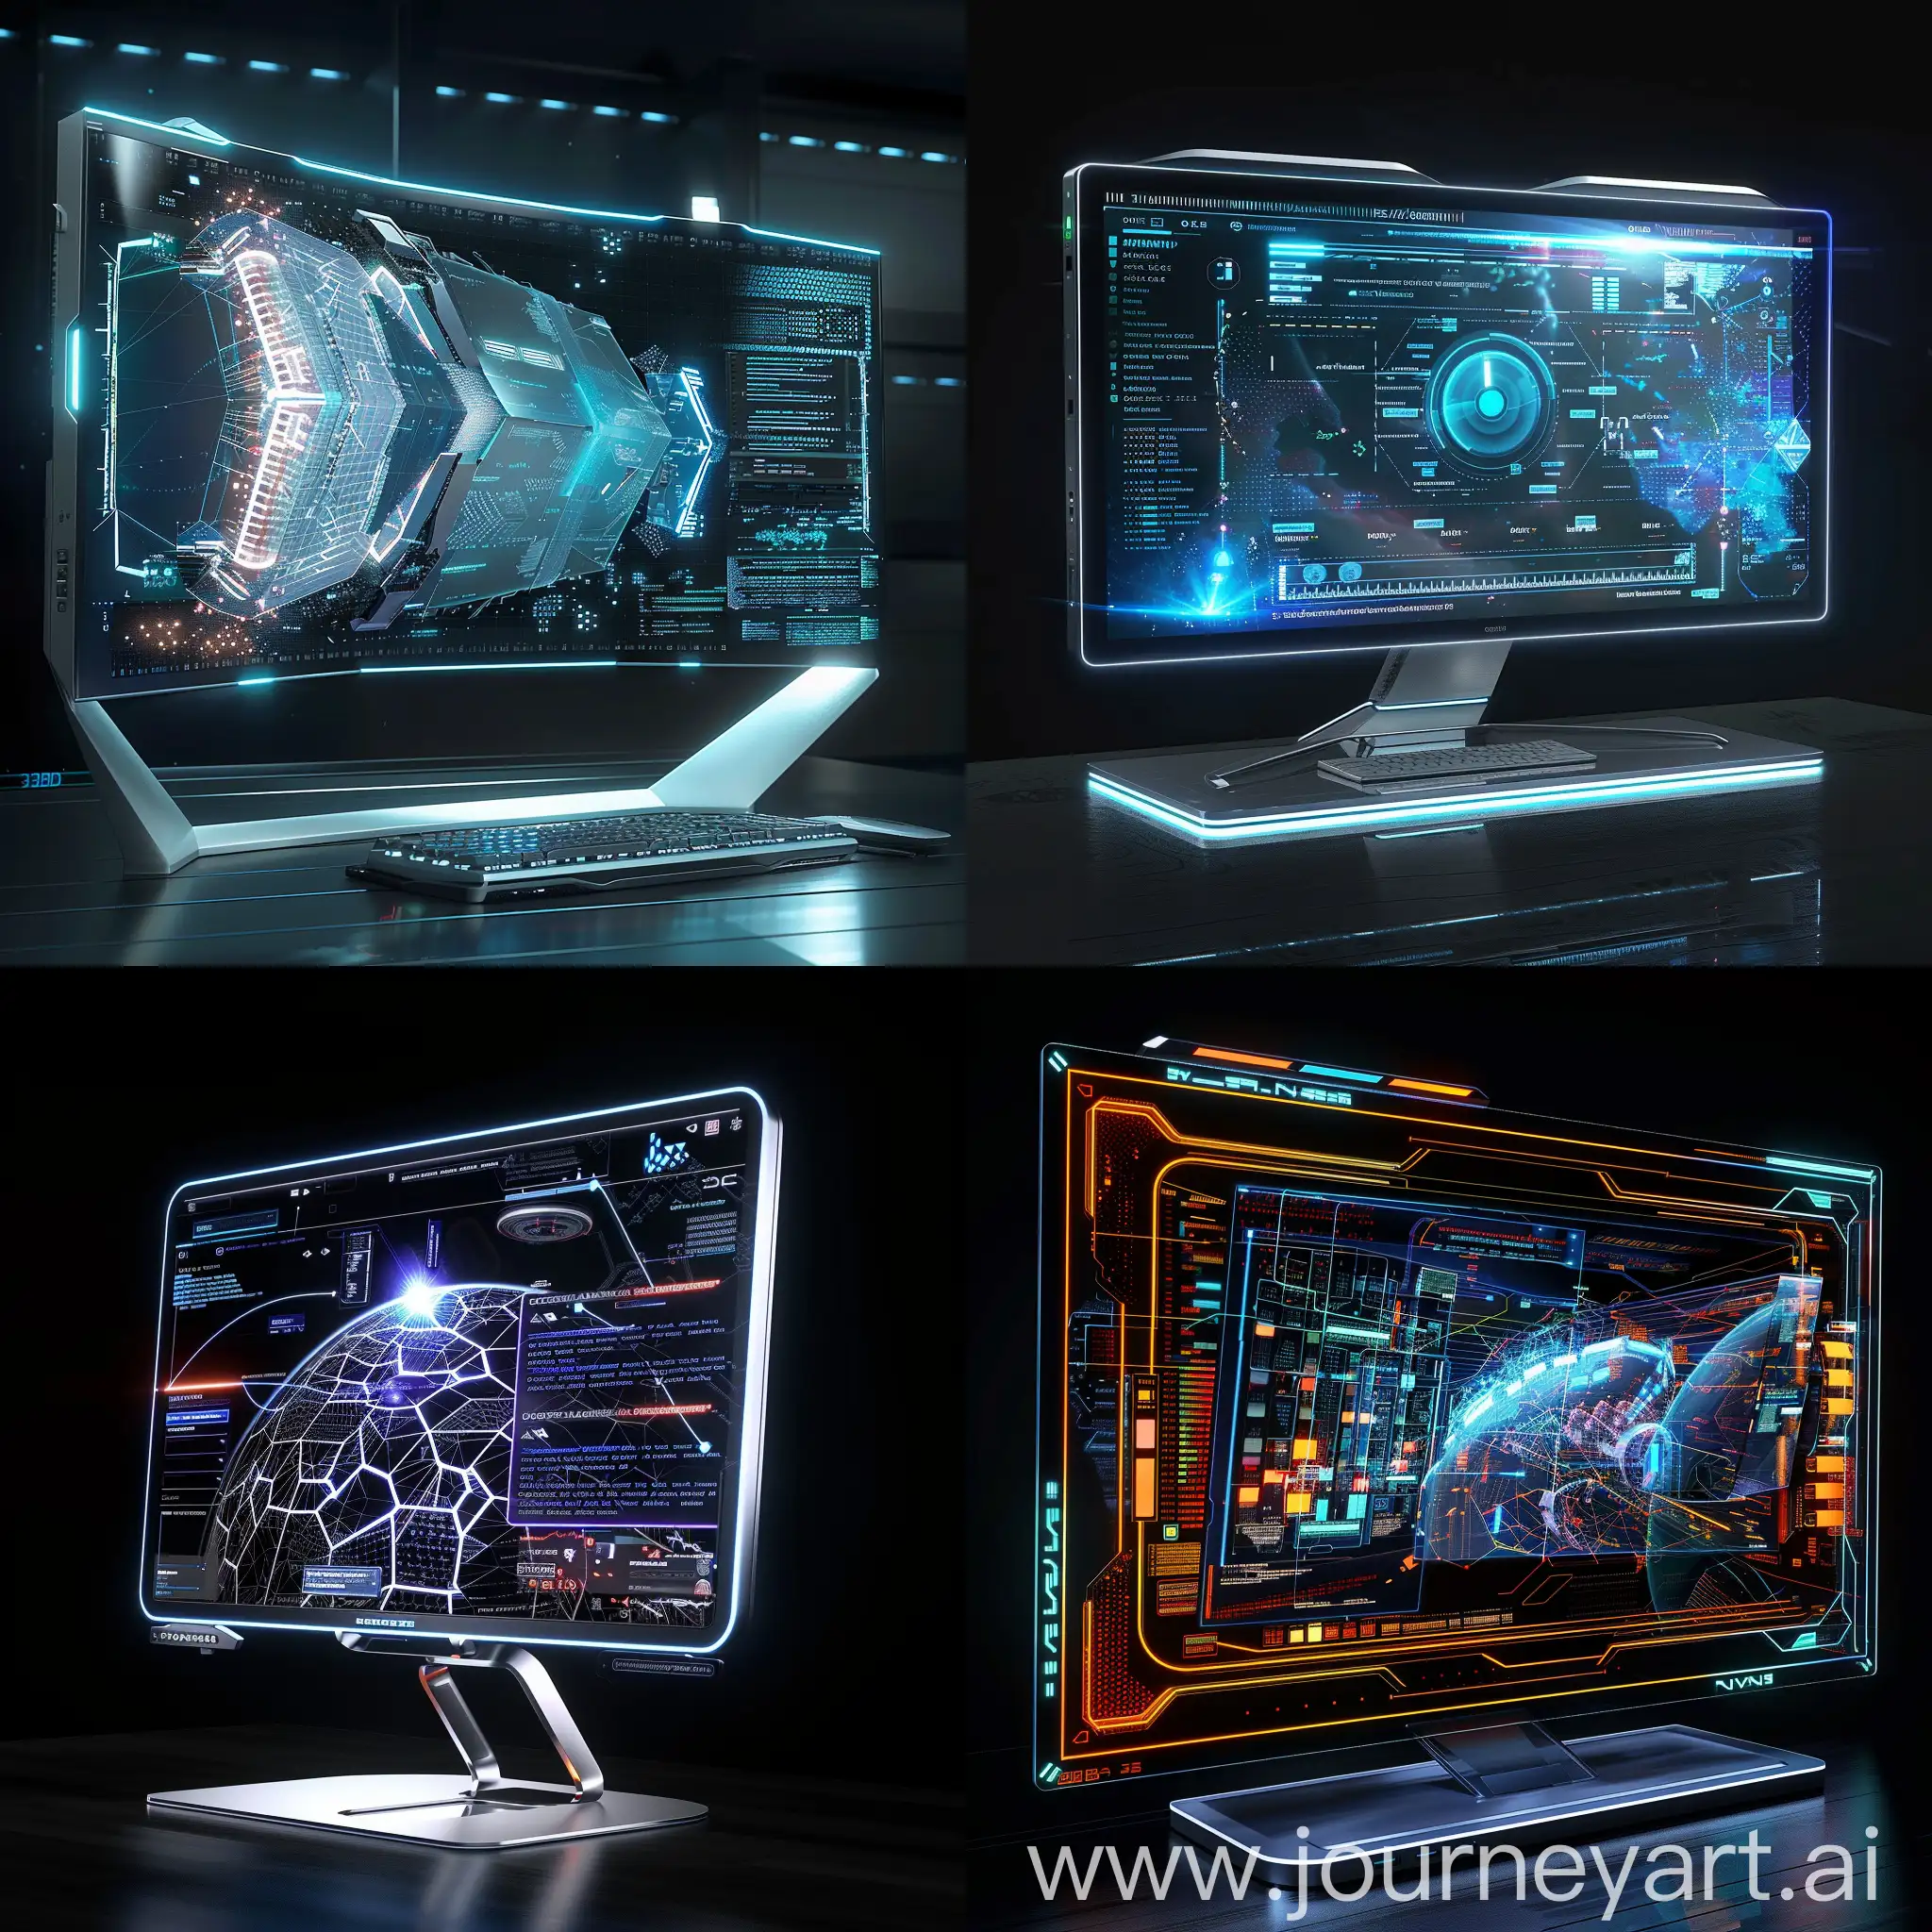 Futuristic-PC-Monitor-with-OLED-MicroLED-Displays-Quantum-Dot-Tech-Flexibility-Touch-Gesture-Control